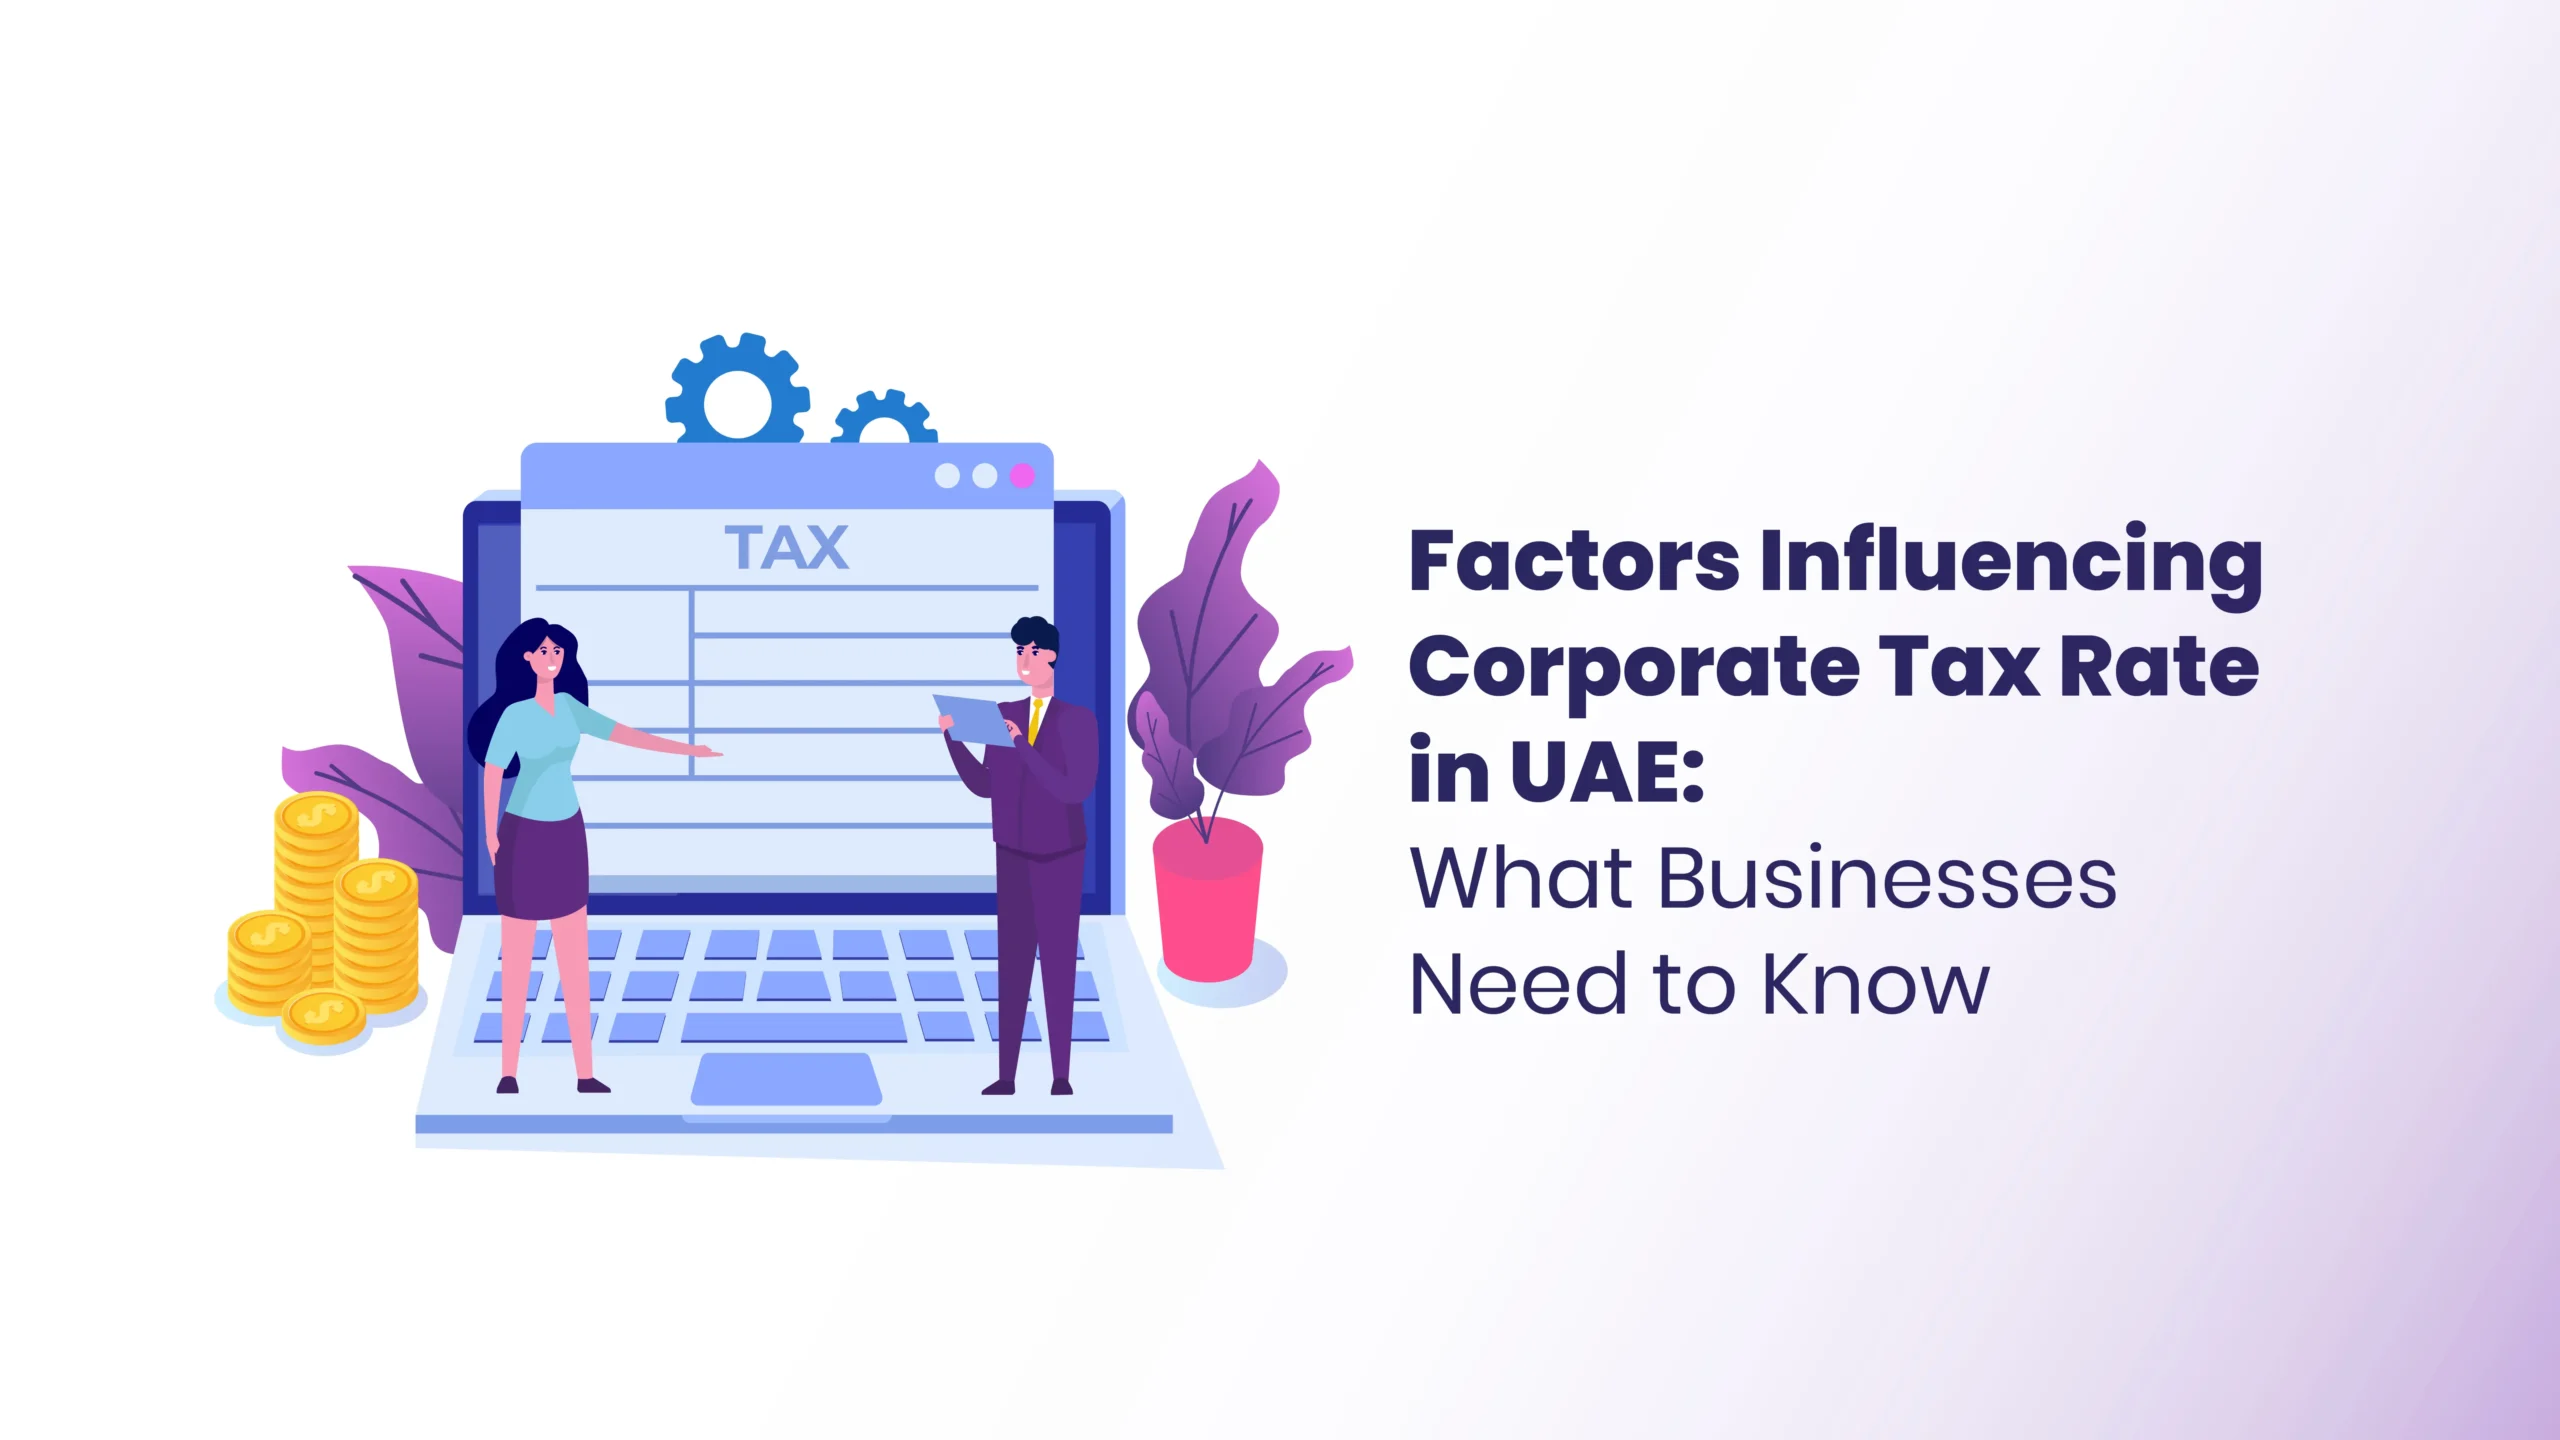 Factors Influencing Corporate Tax Rate in UAE: What Businesses Need to Know